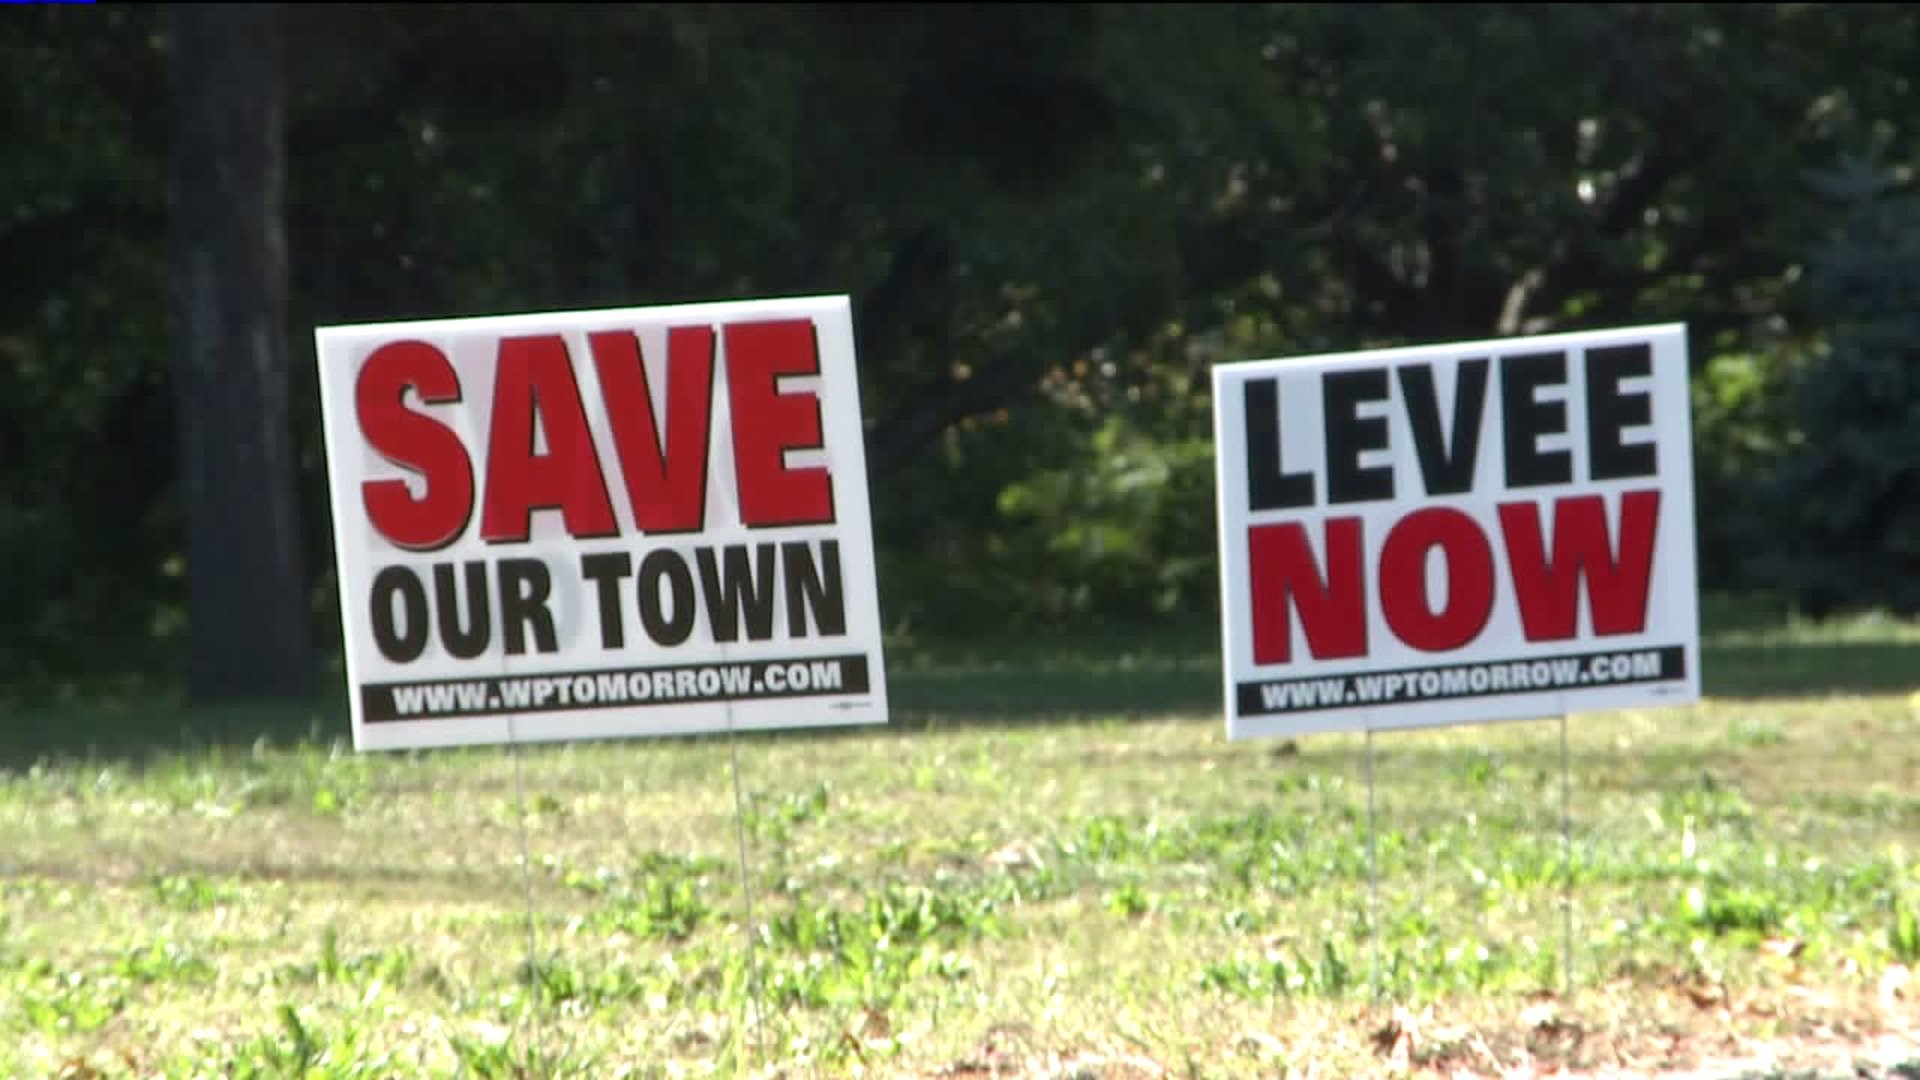 Will West Pittston Ever Get a Levee?